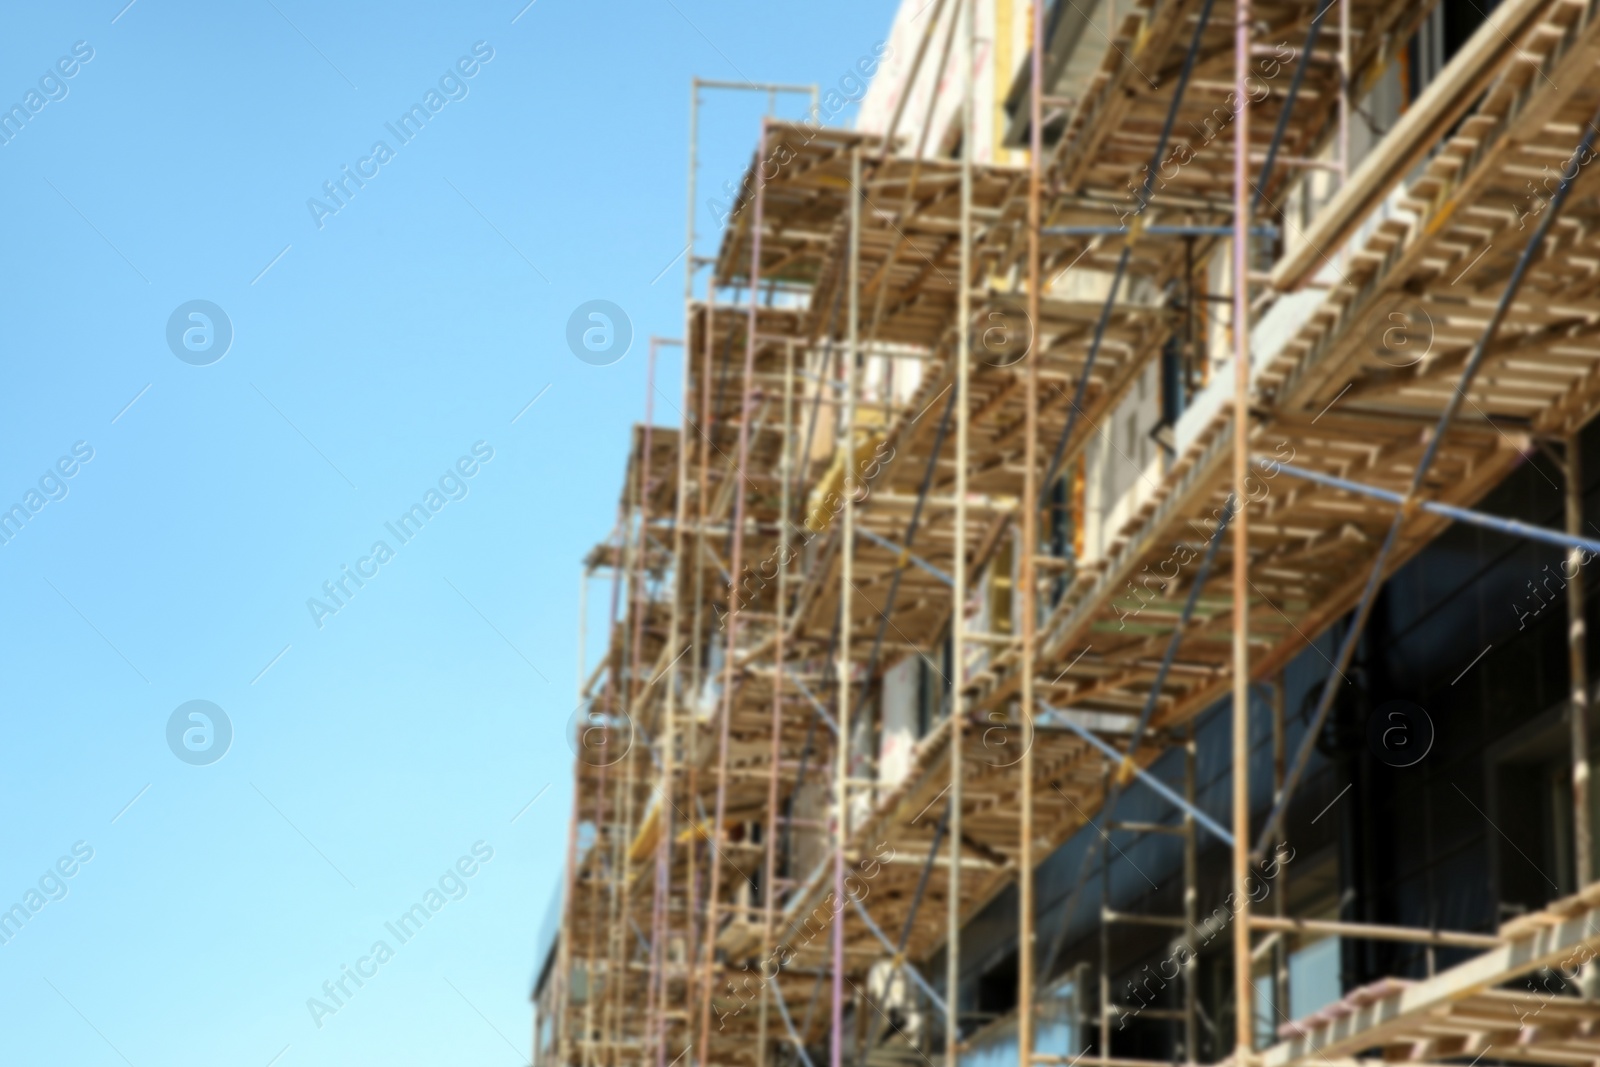 Photo of View of unfinished building with scaffolding against blue sky, space for text